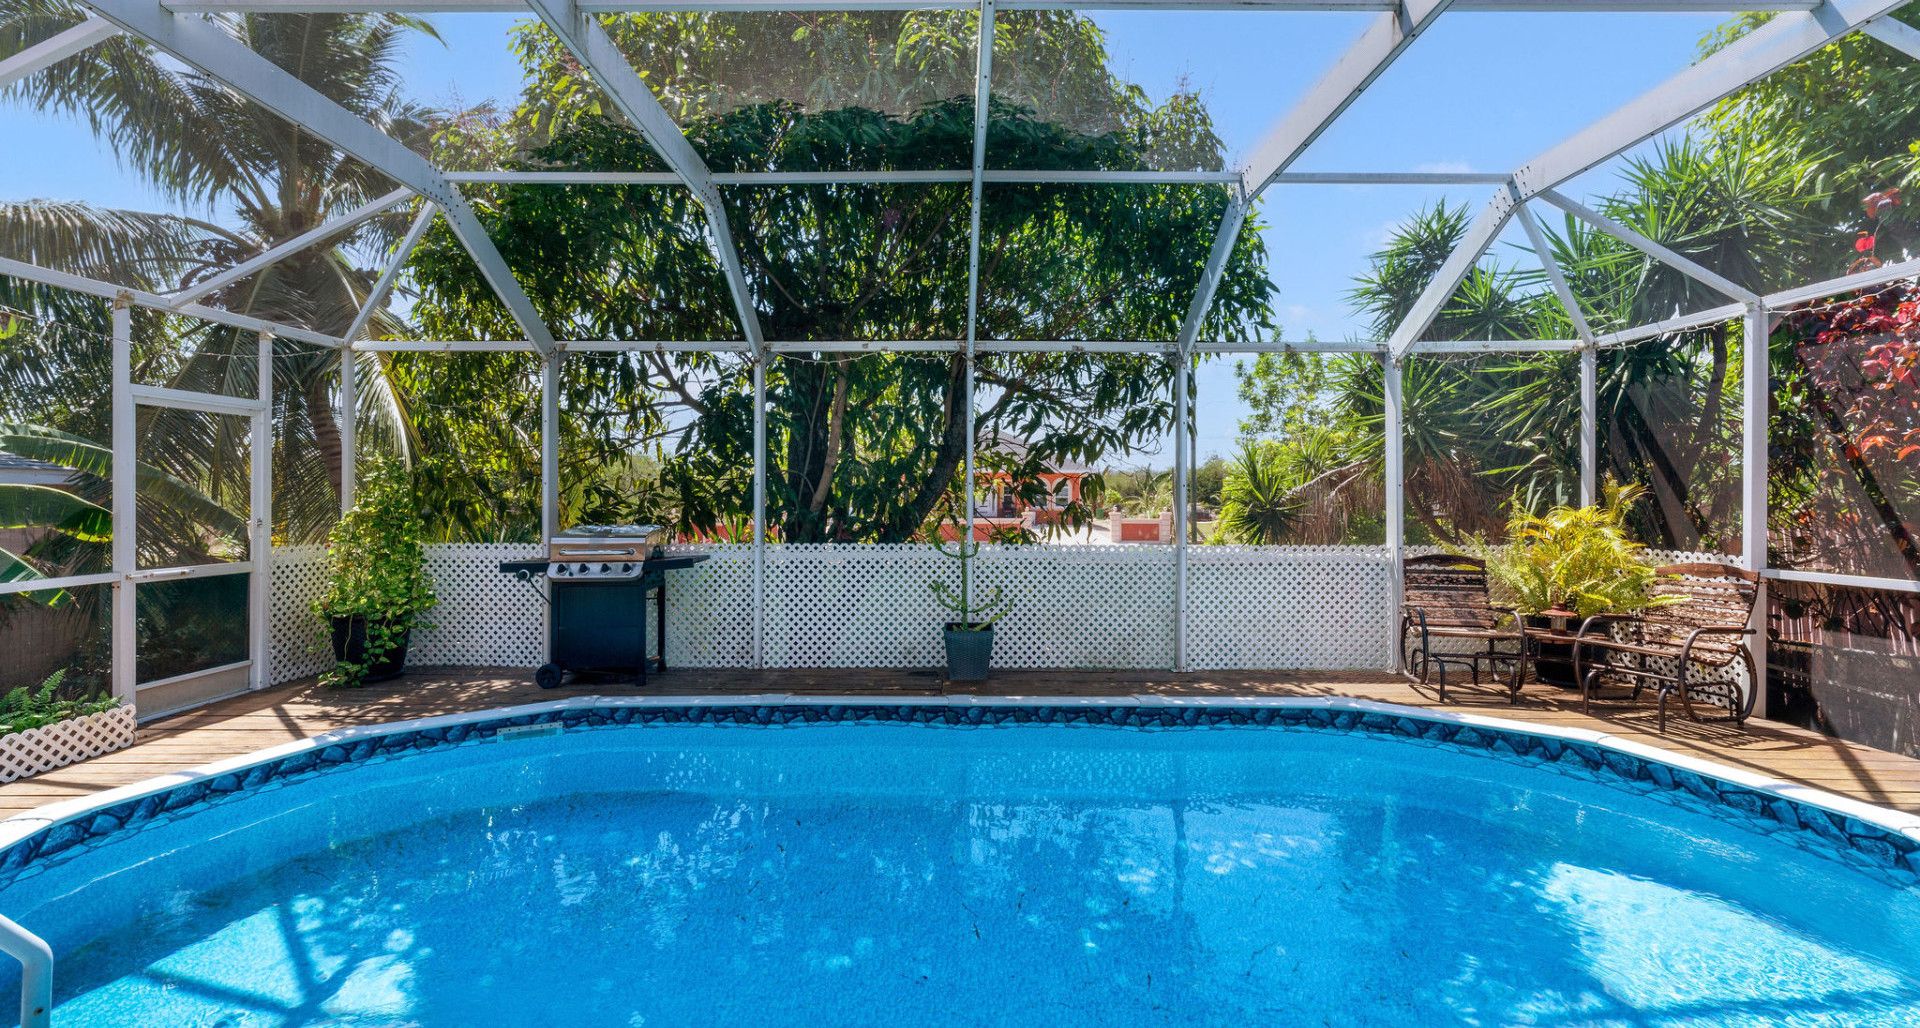 Detached Home with Pool and large garden in Northward